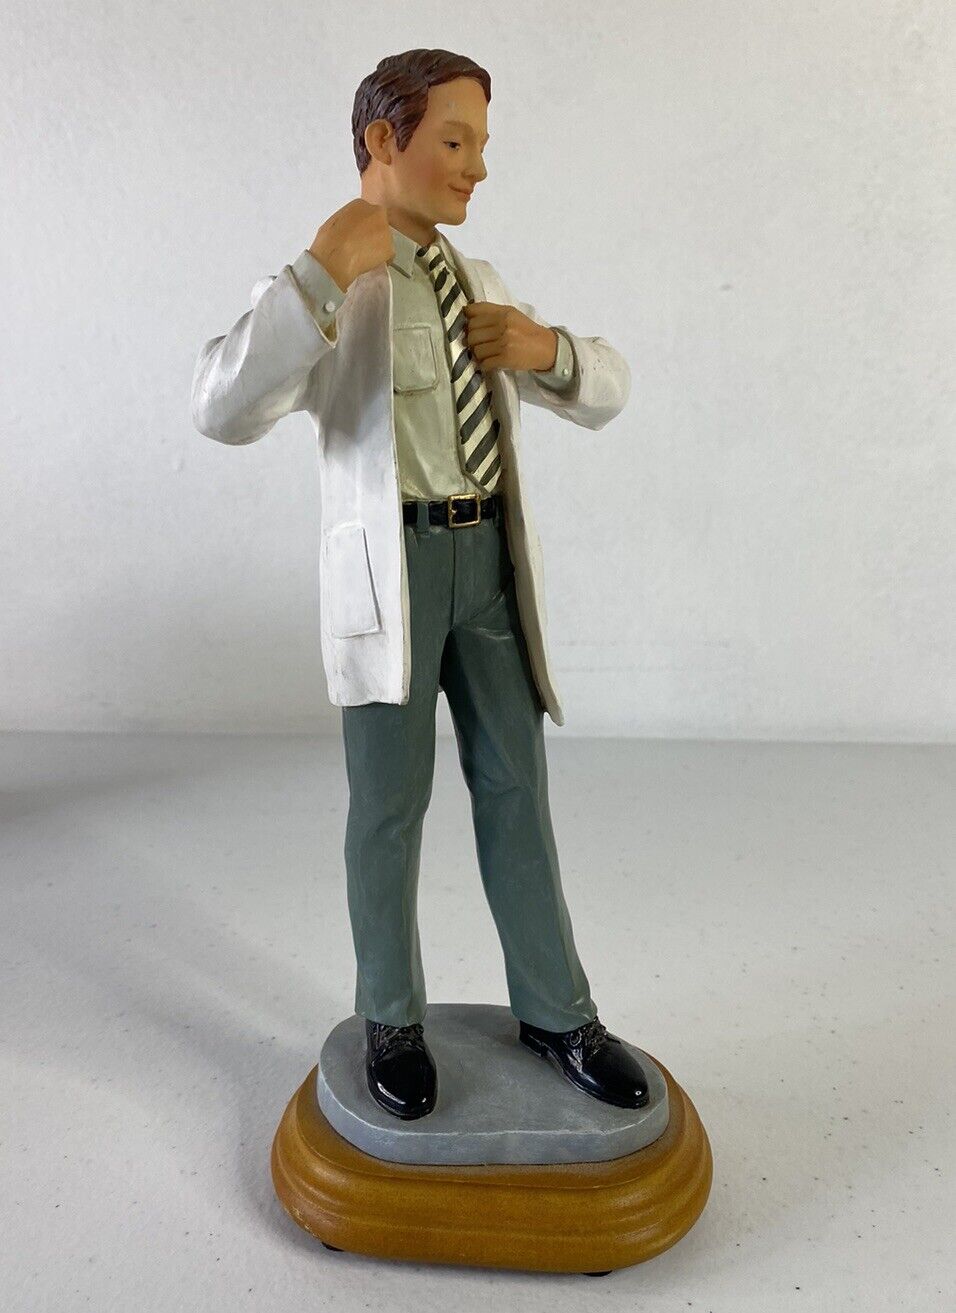 Vanmark Masters of Miracles Rites Of Passage Doctor Figurine DR94185 2001V M